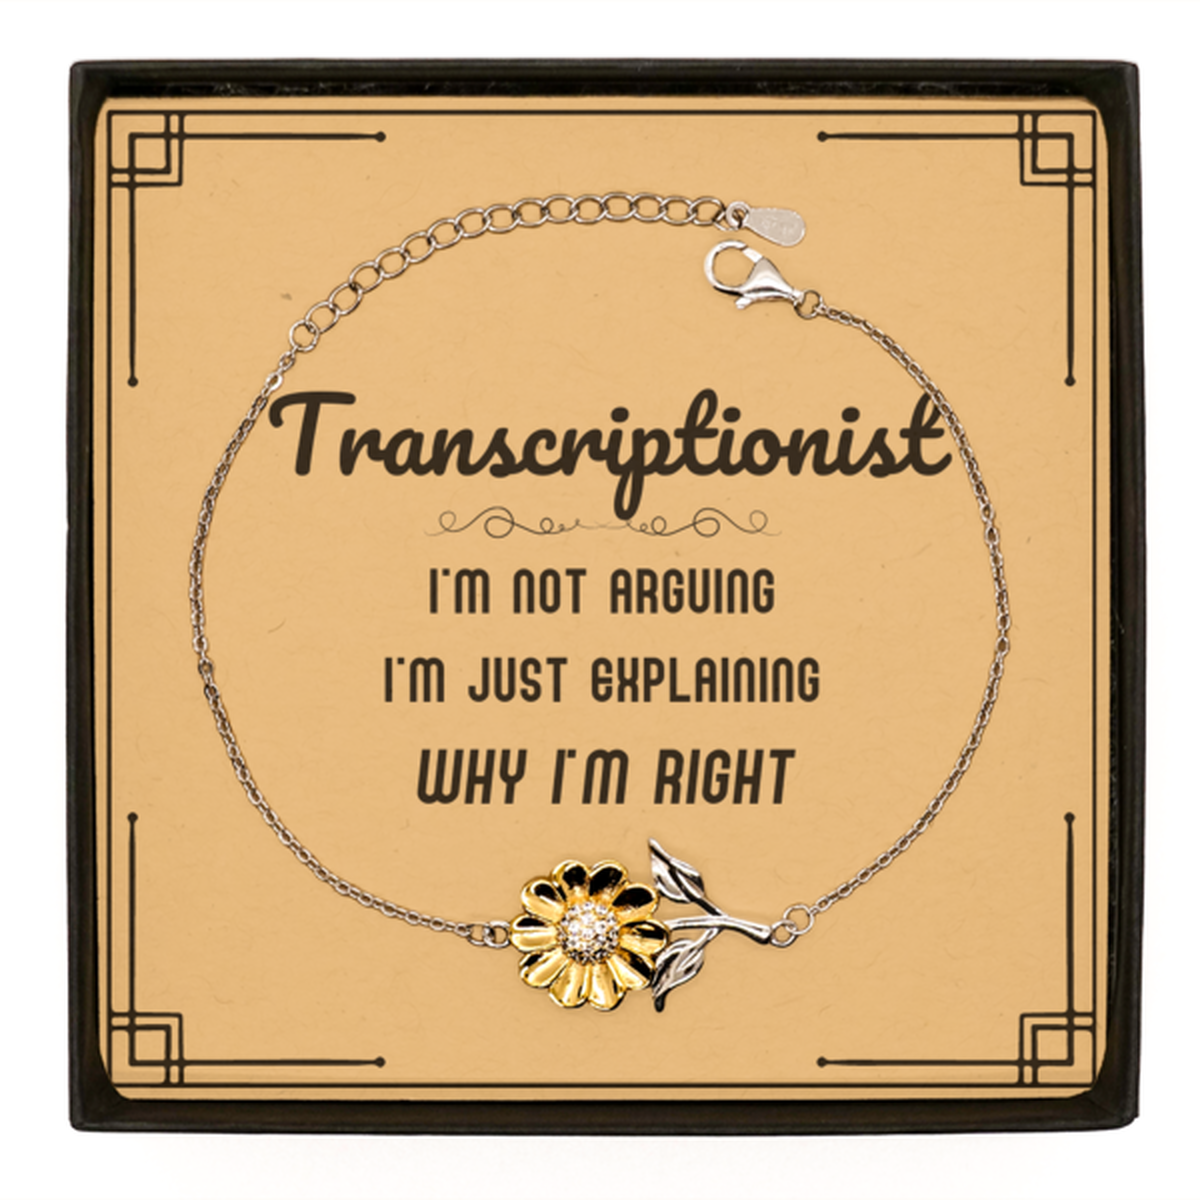 Transcriptionist I'm not Arguing. I'm Just Explaining Why I'm RIGHT Sunflower Bracelet, Funny Saying Quote Transcriptionist Gifts For Transcriptionist Message Card Graduation Birthday Christmas Gifts for Men Women Coworker